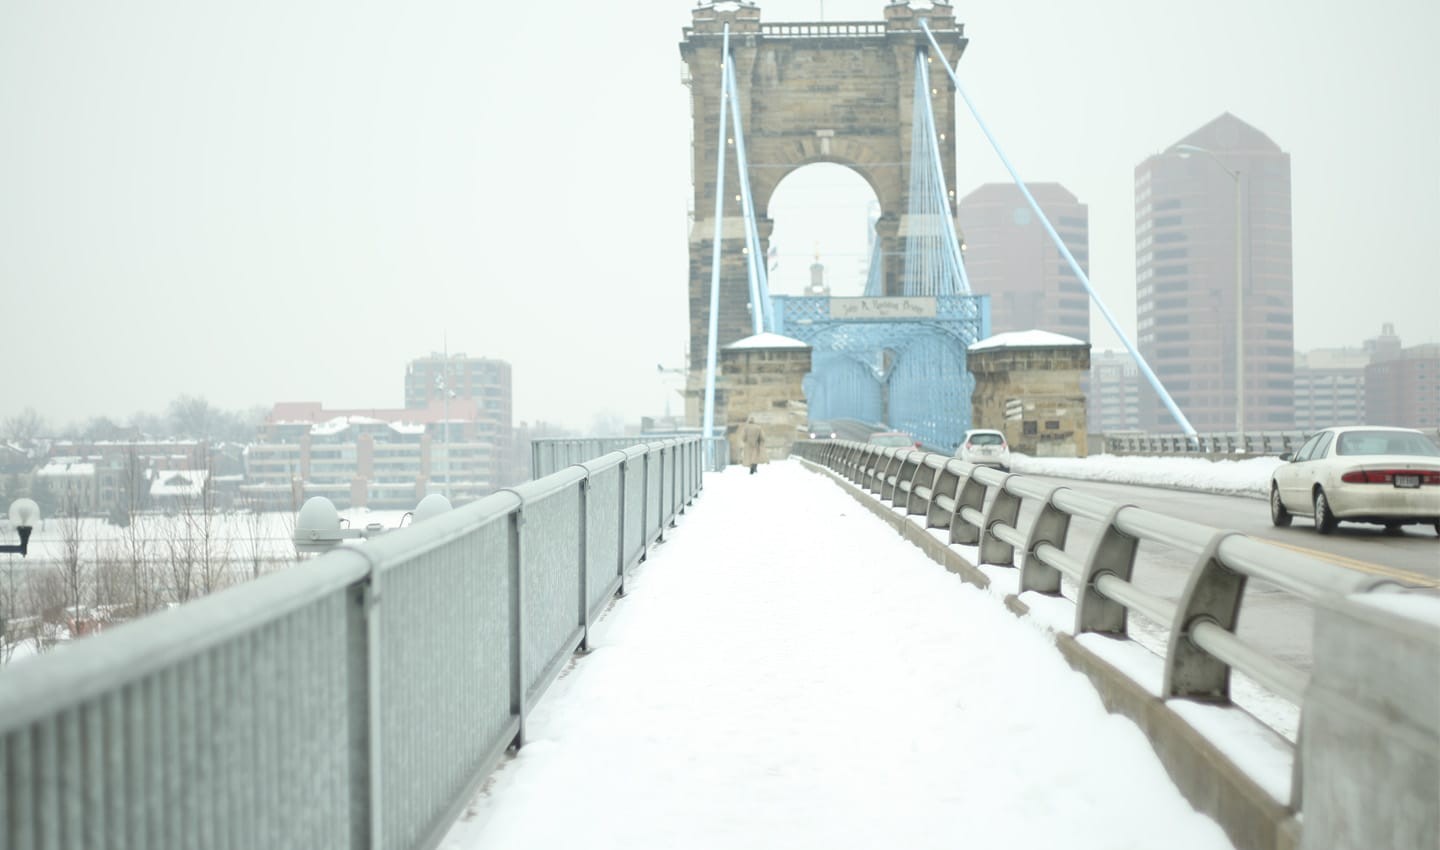 Cincinnati hit by bad snow at the start of the year saw its traffic congestion increase dramatically as road networks became difficult to traverse.